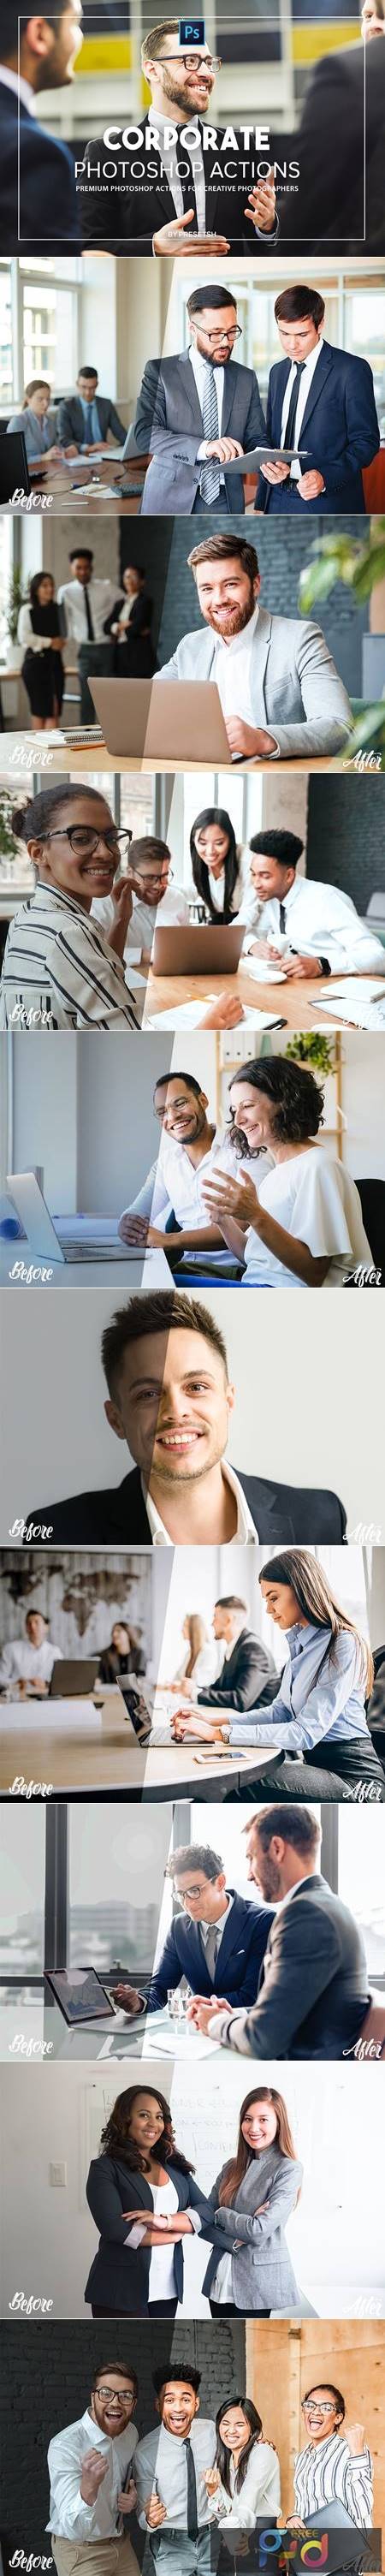 Corporate Photoshop actions